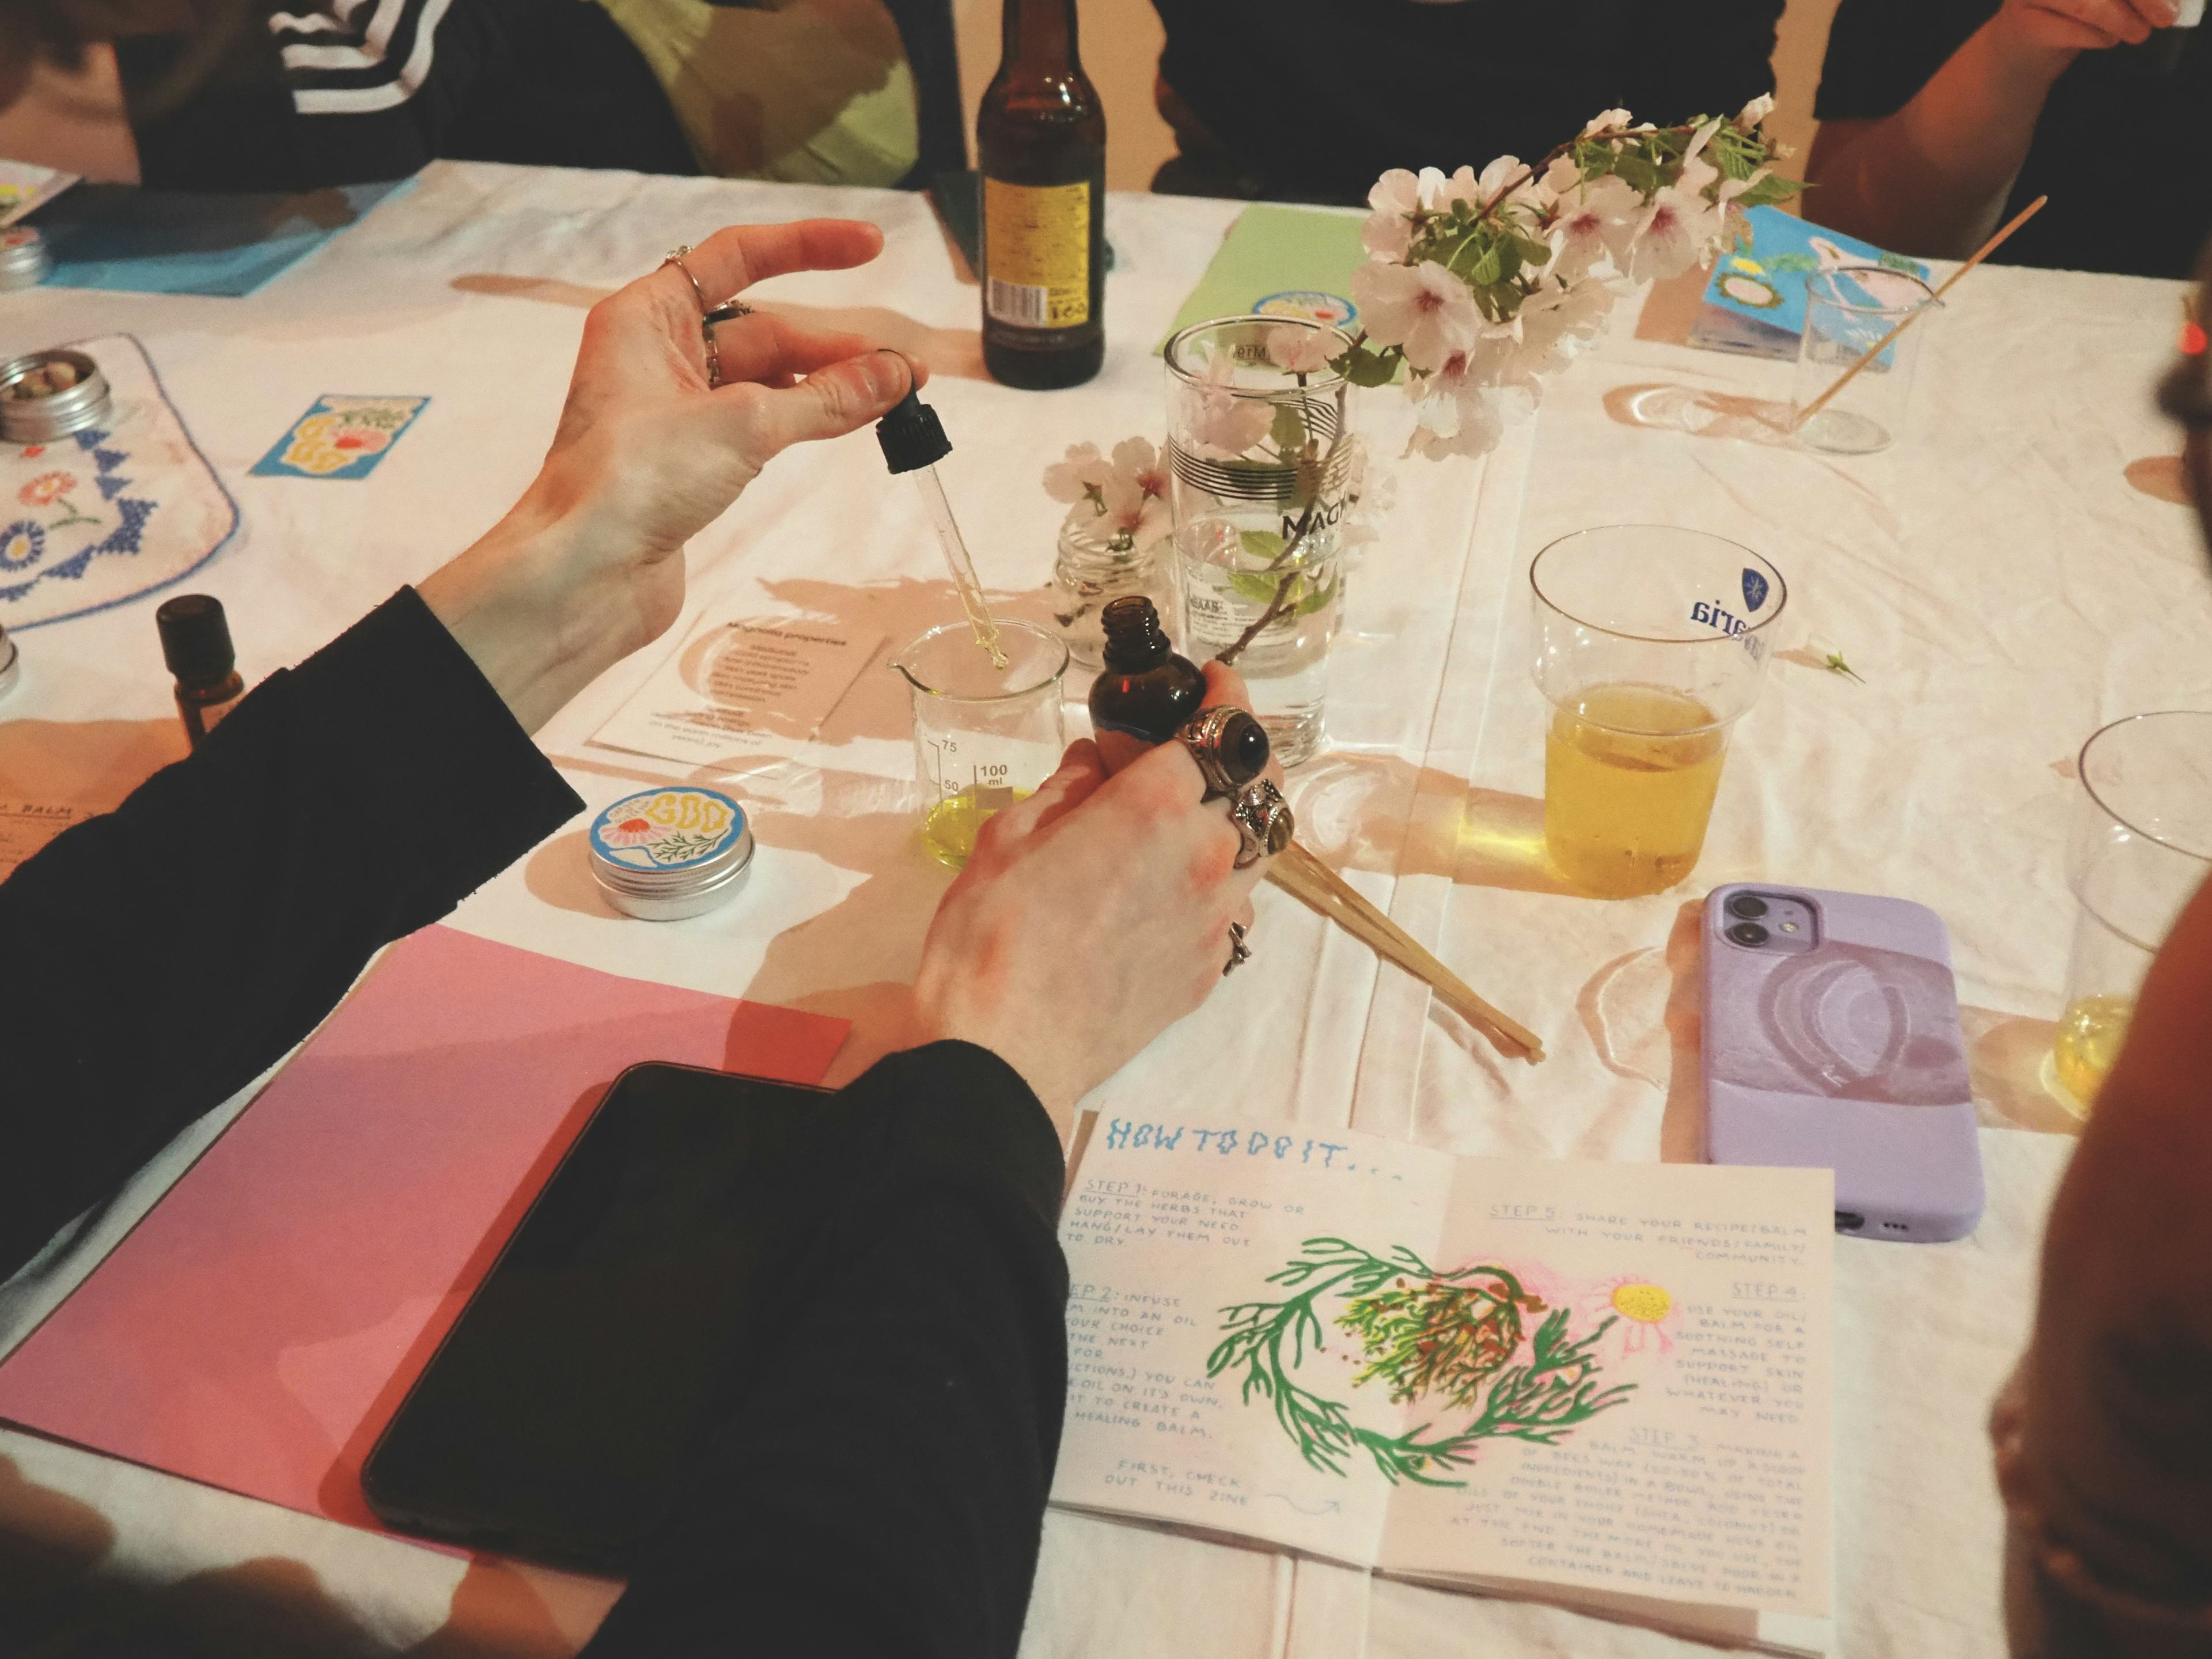 Workshop table with people working with flowers